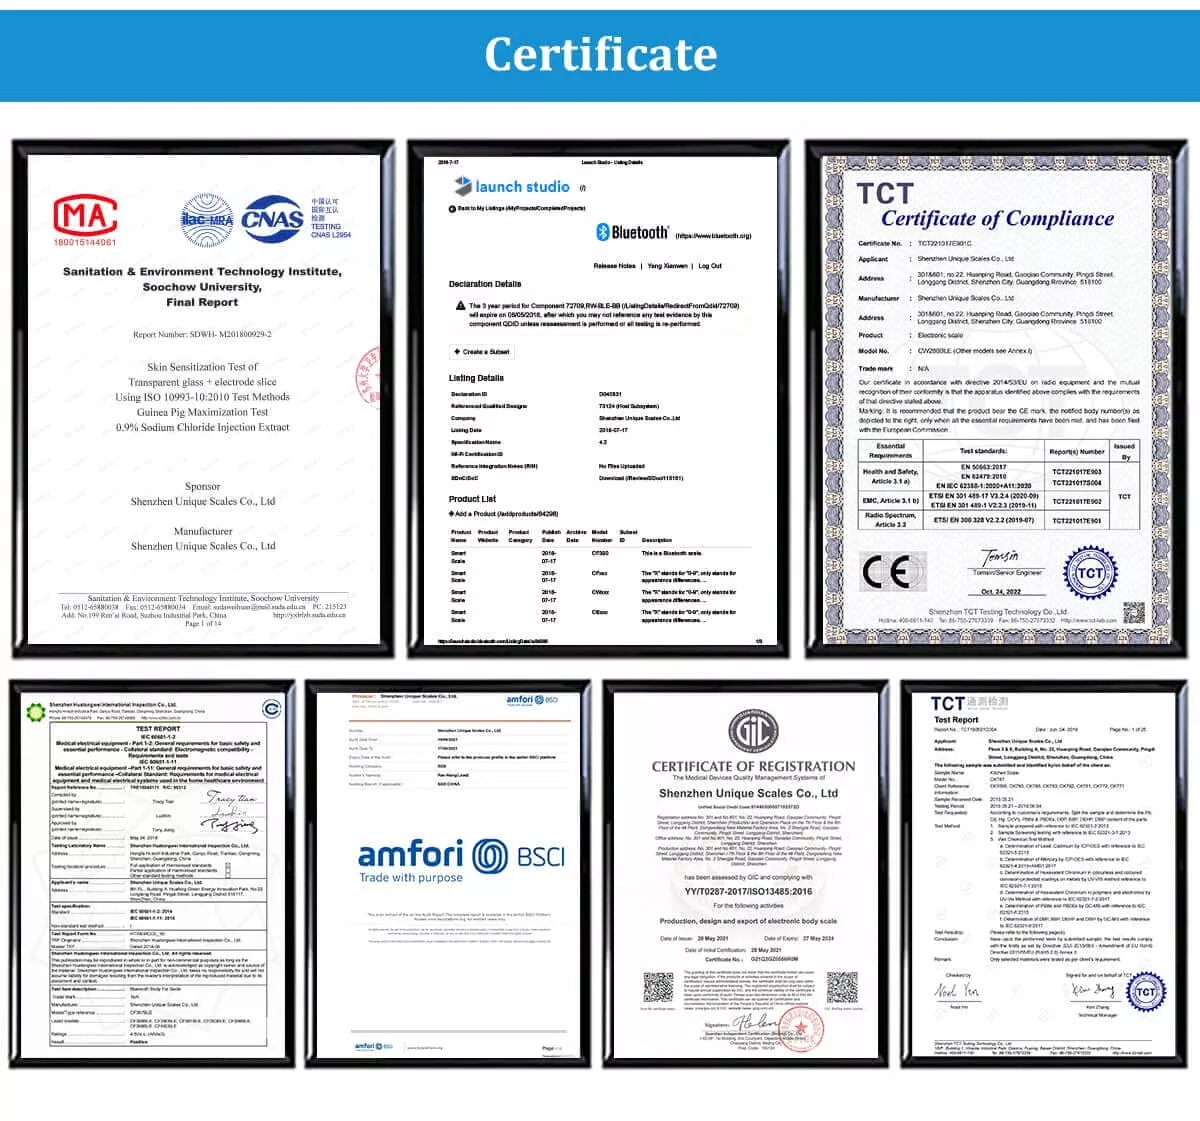 Our certificates as smart scales manufacturer